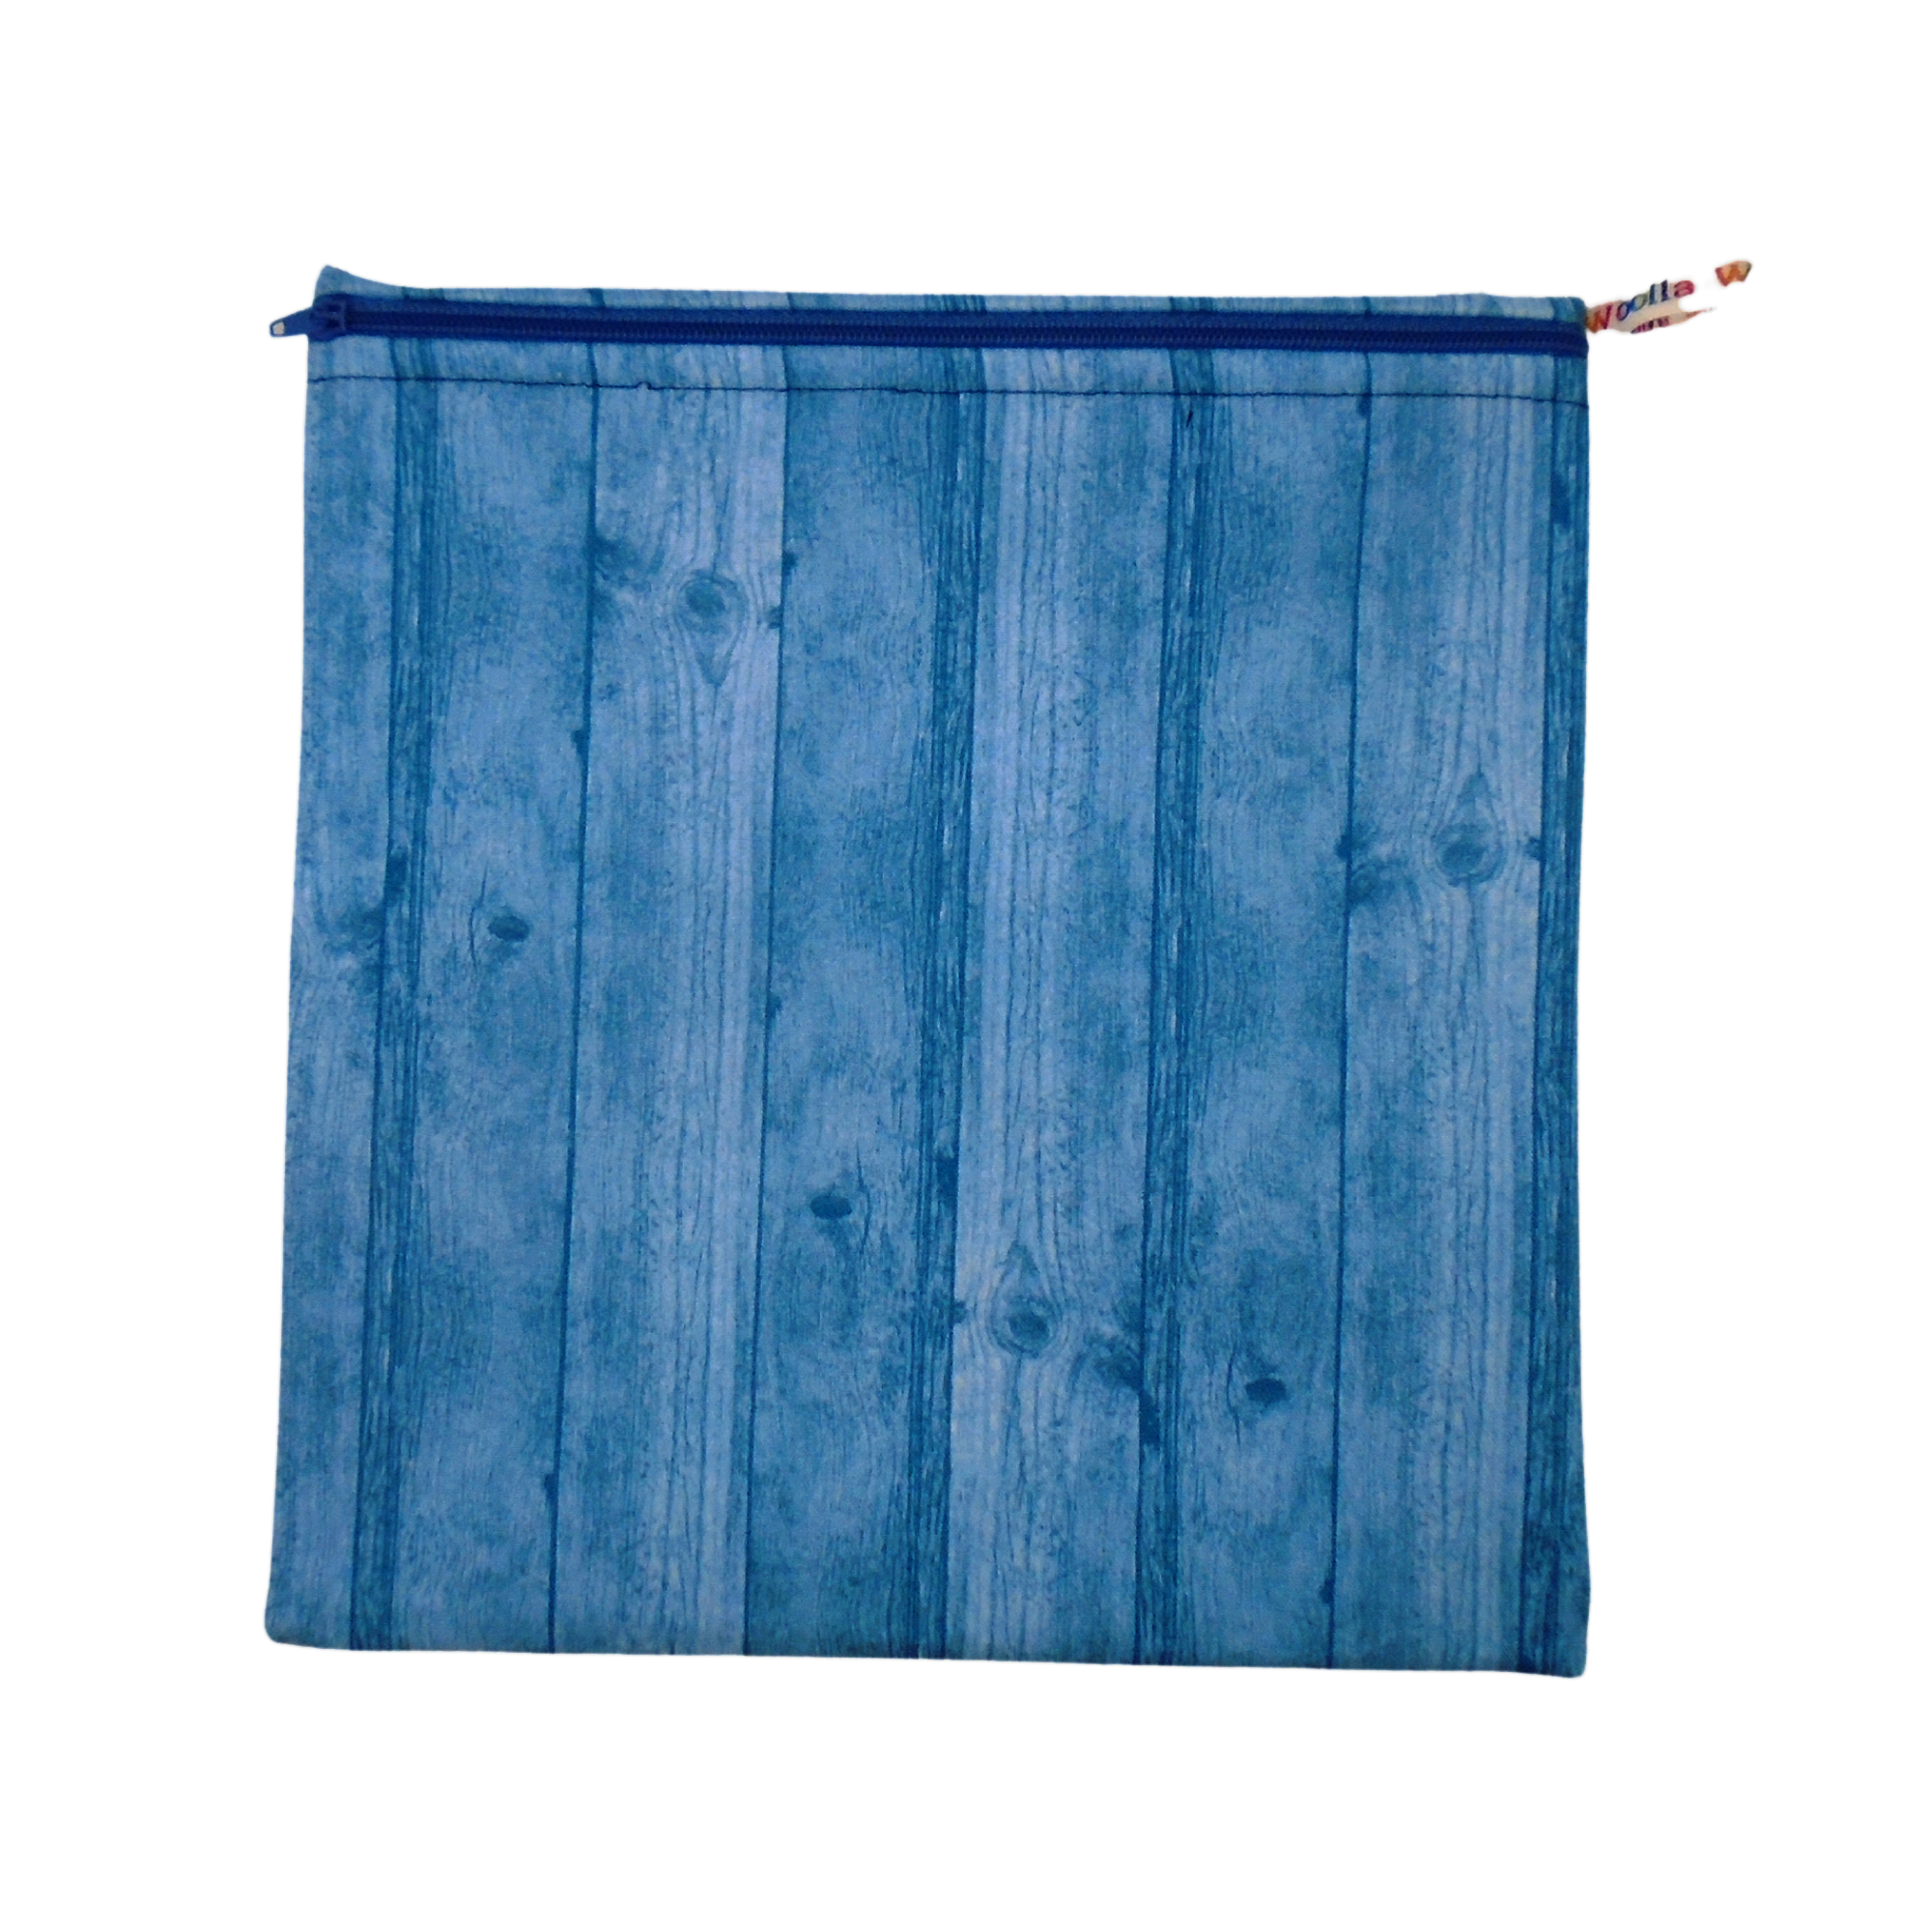 Blue Wood Grain - Large Poppins Pouch - Waterproof, Washable, Food Safe, Vegan, Lined Zip Bag